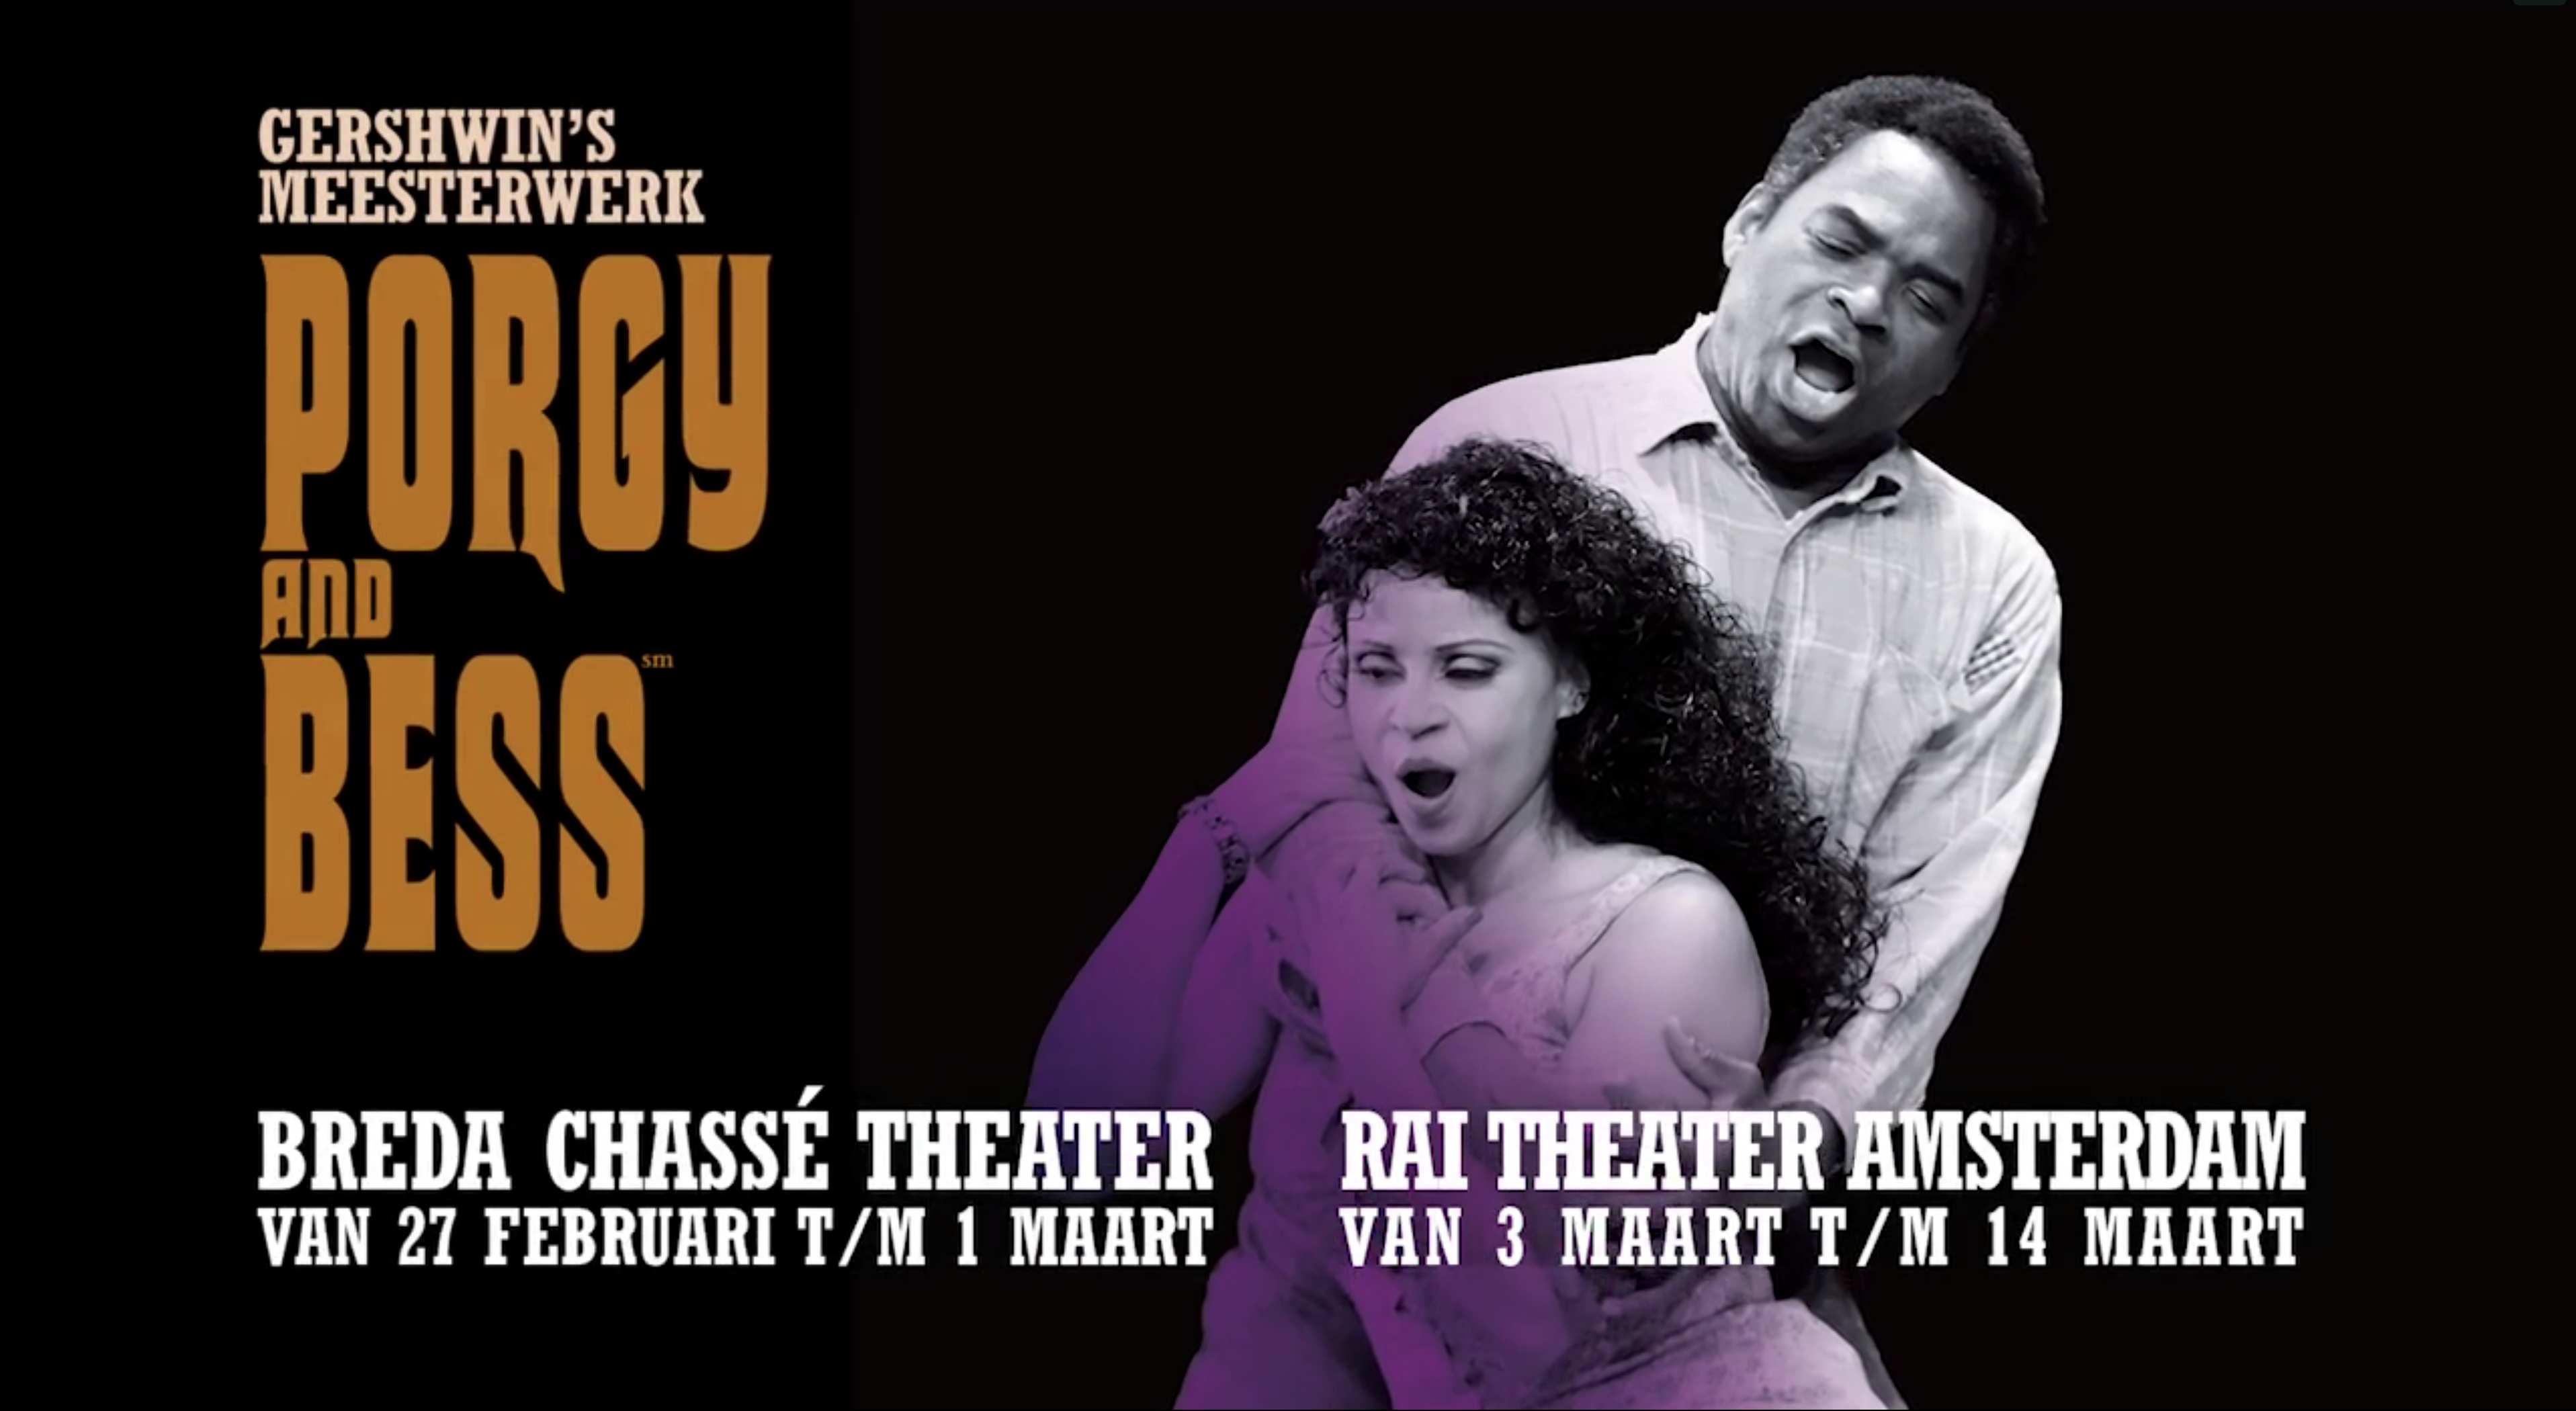 download porgy and bess